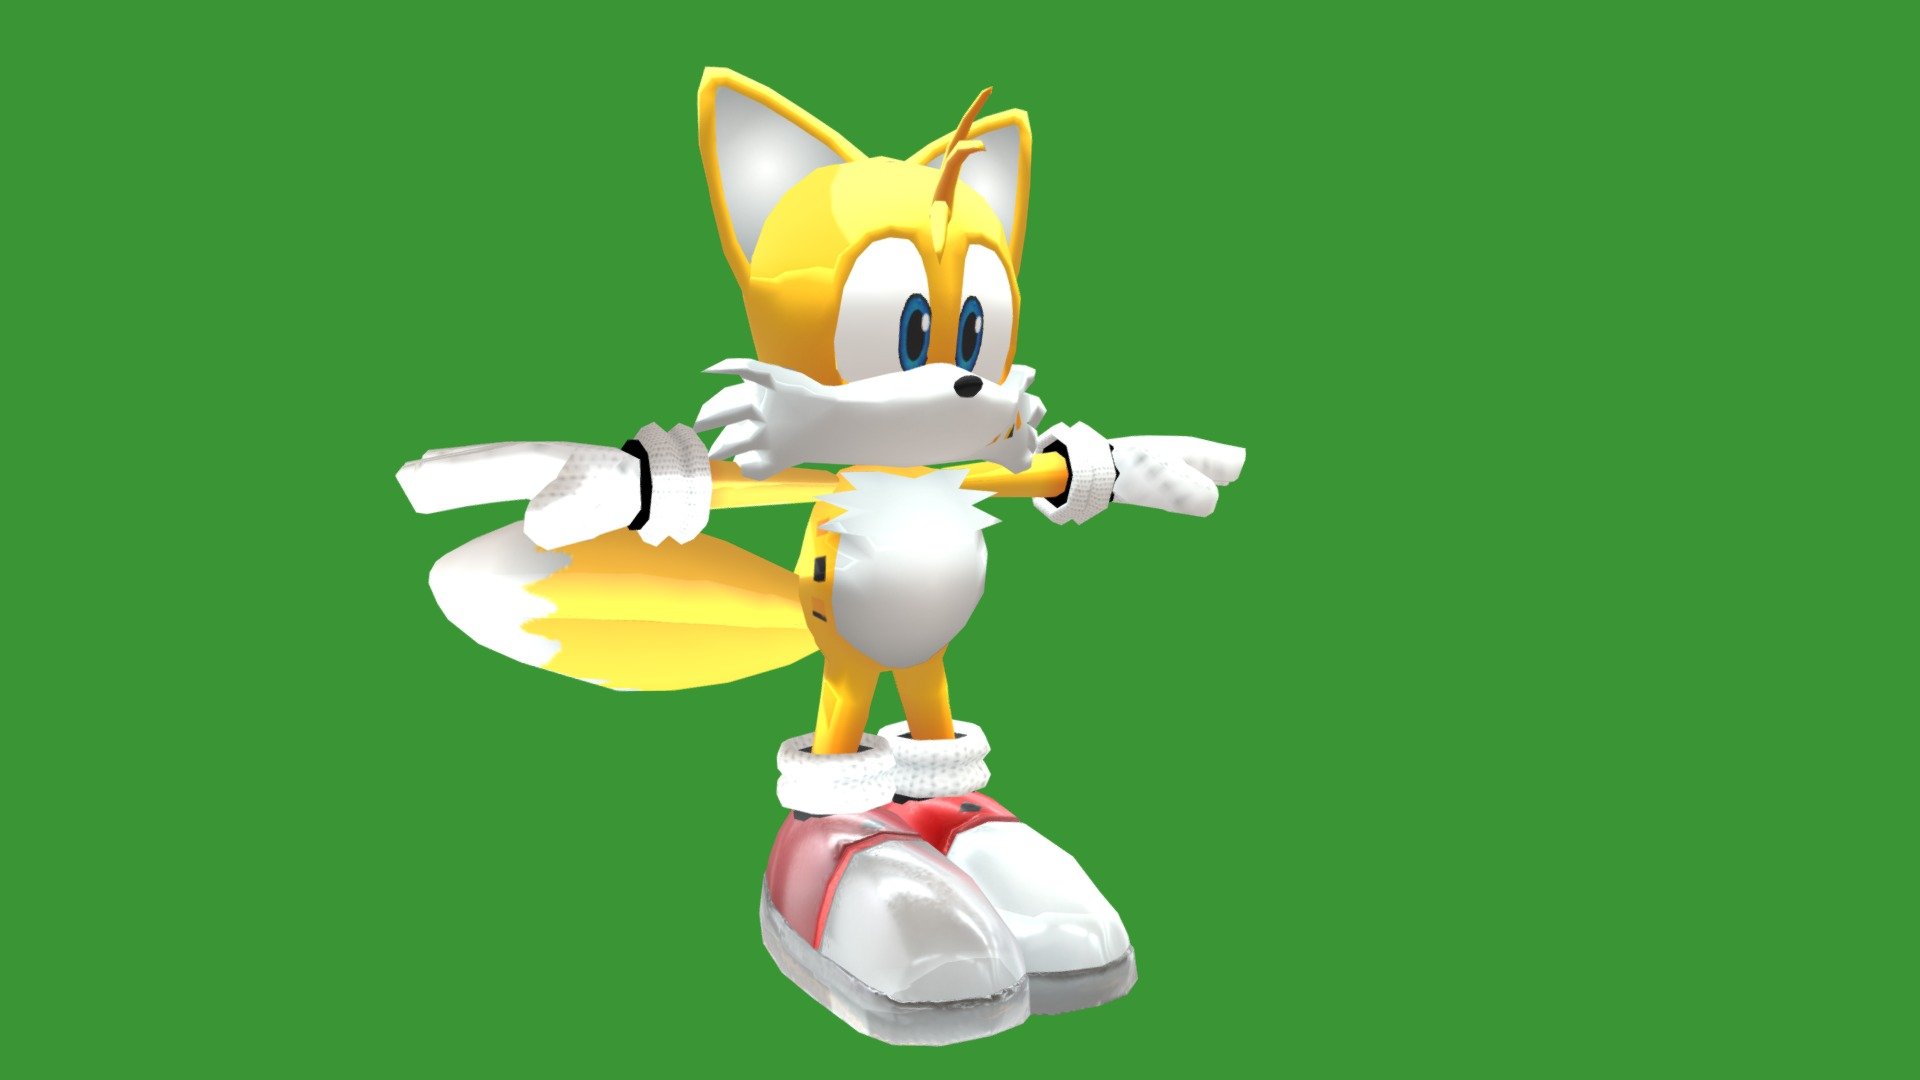 Tails Model